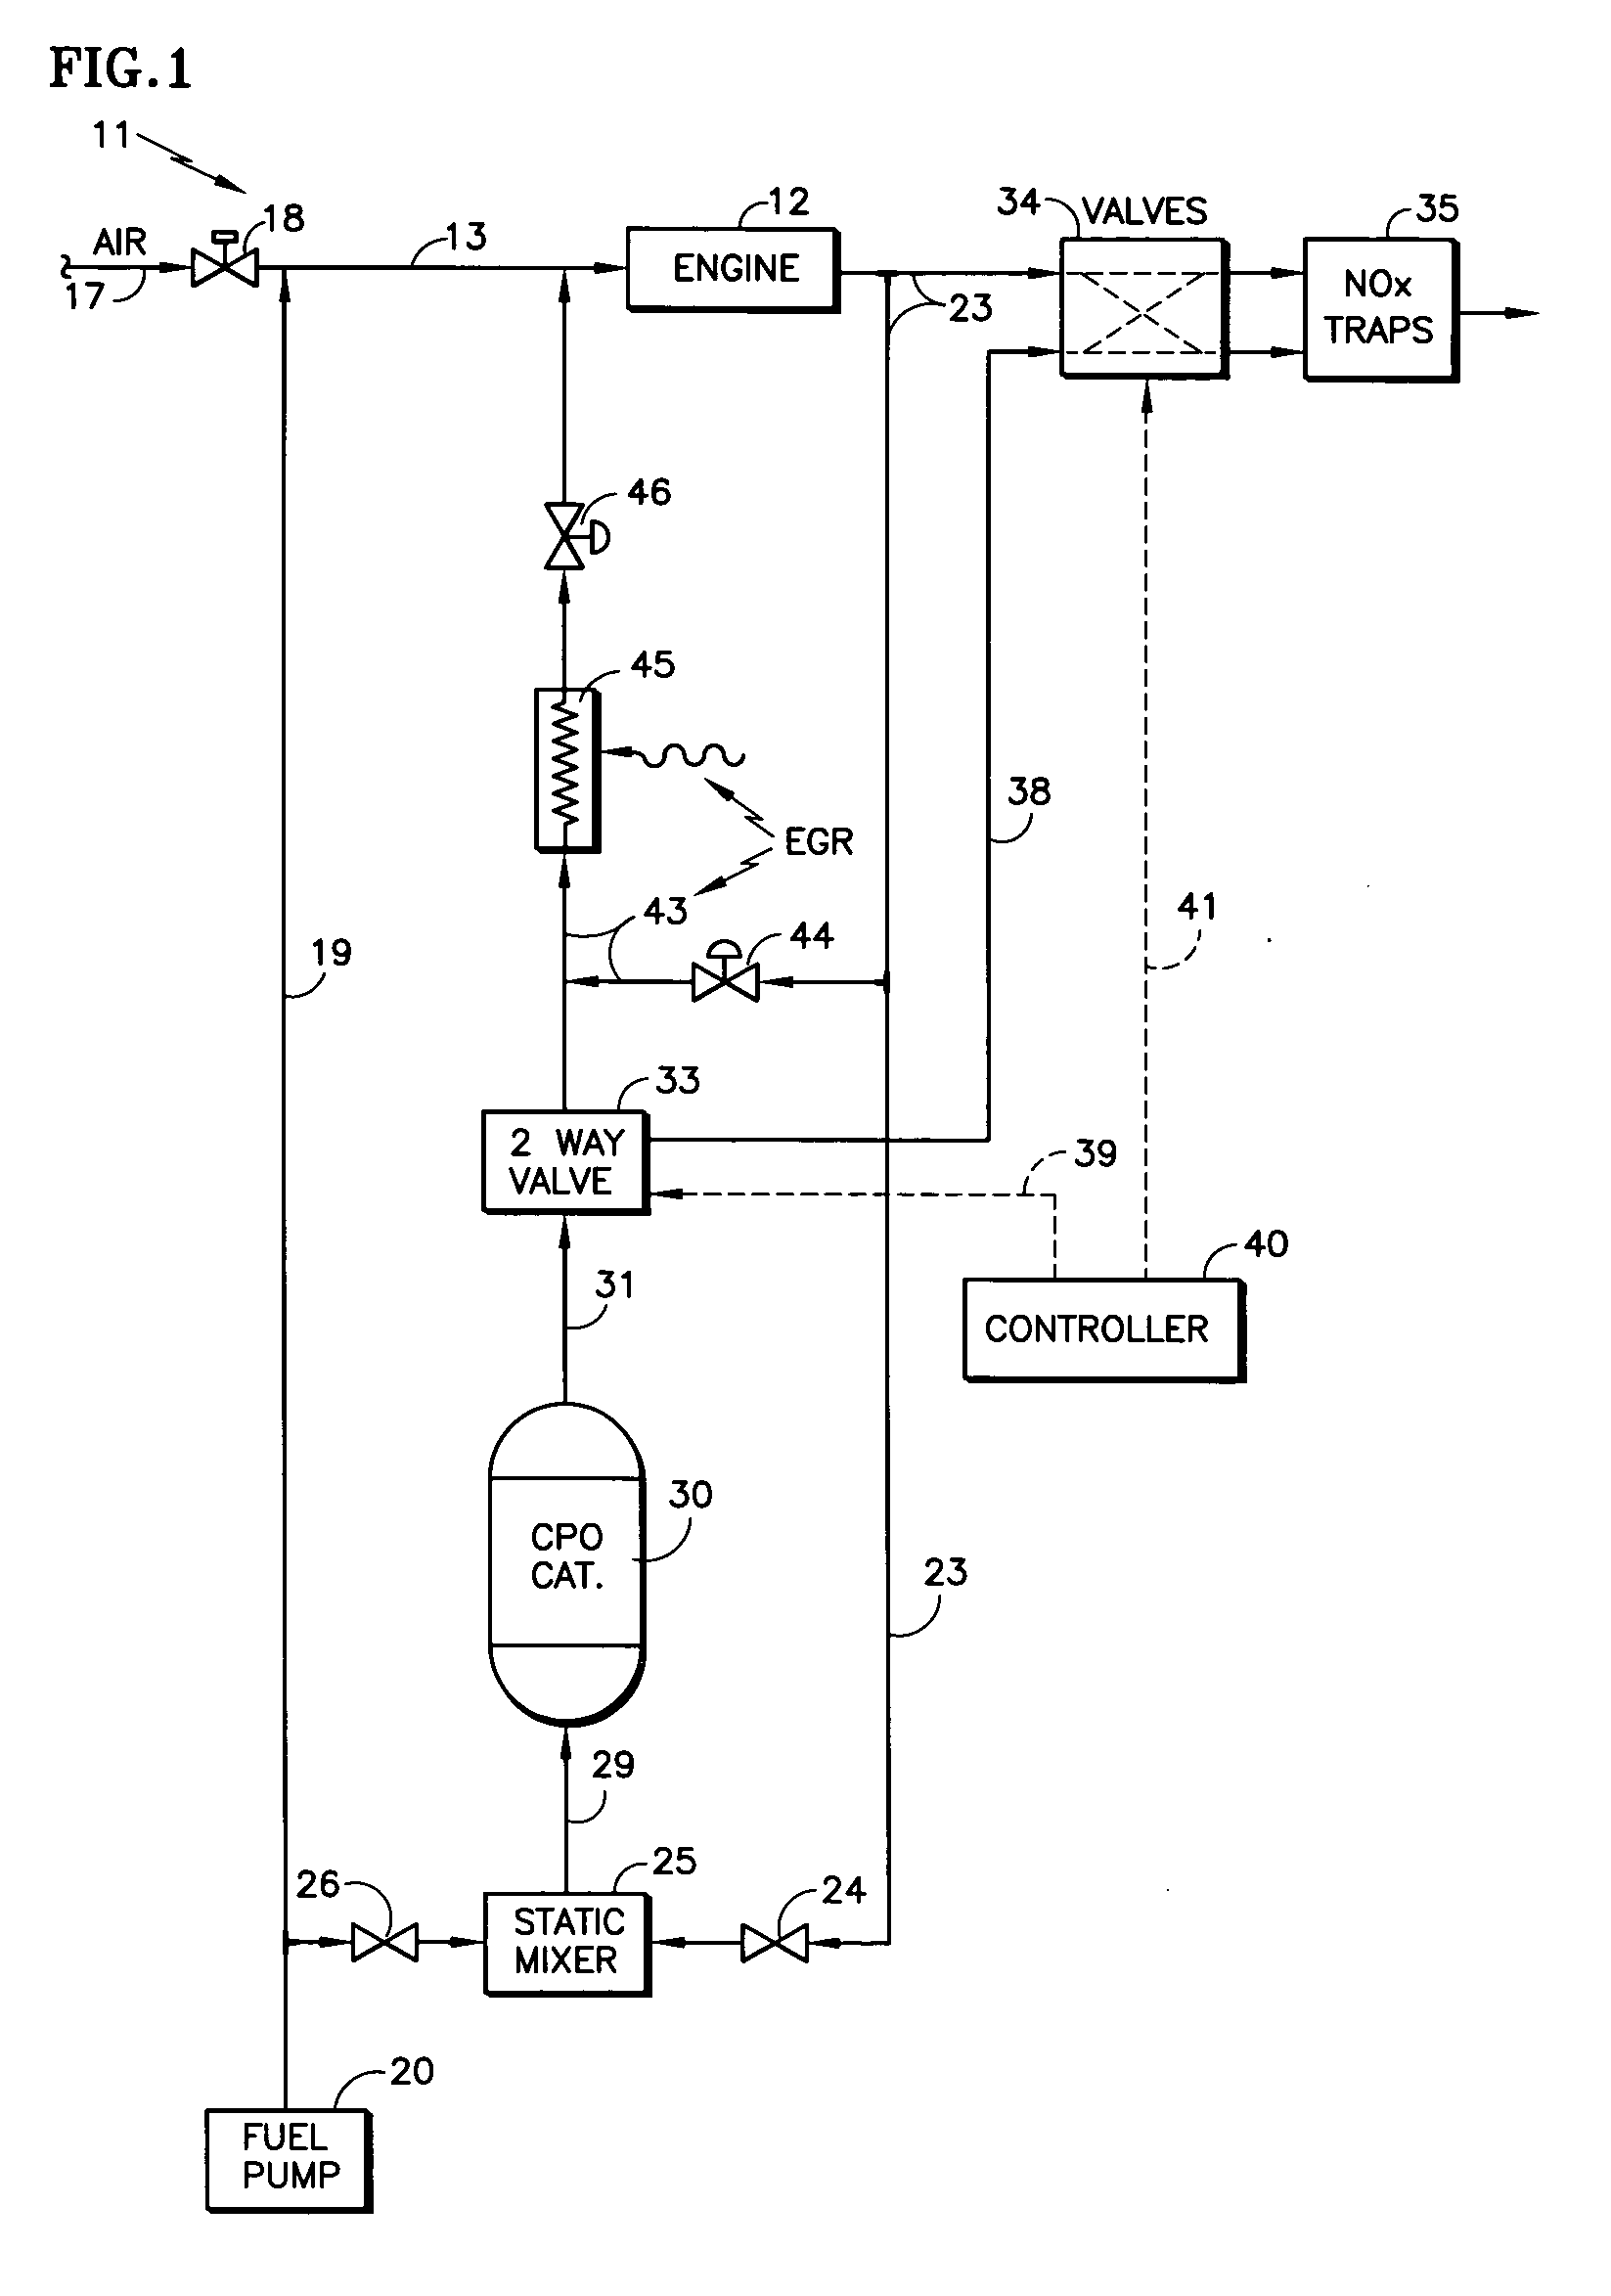 Intermittent application of syngas to NOx trap and/or diesel engine